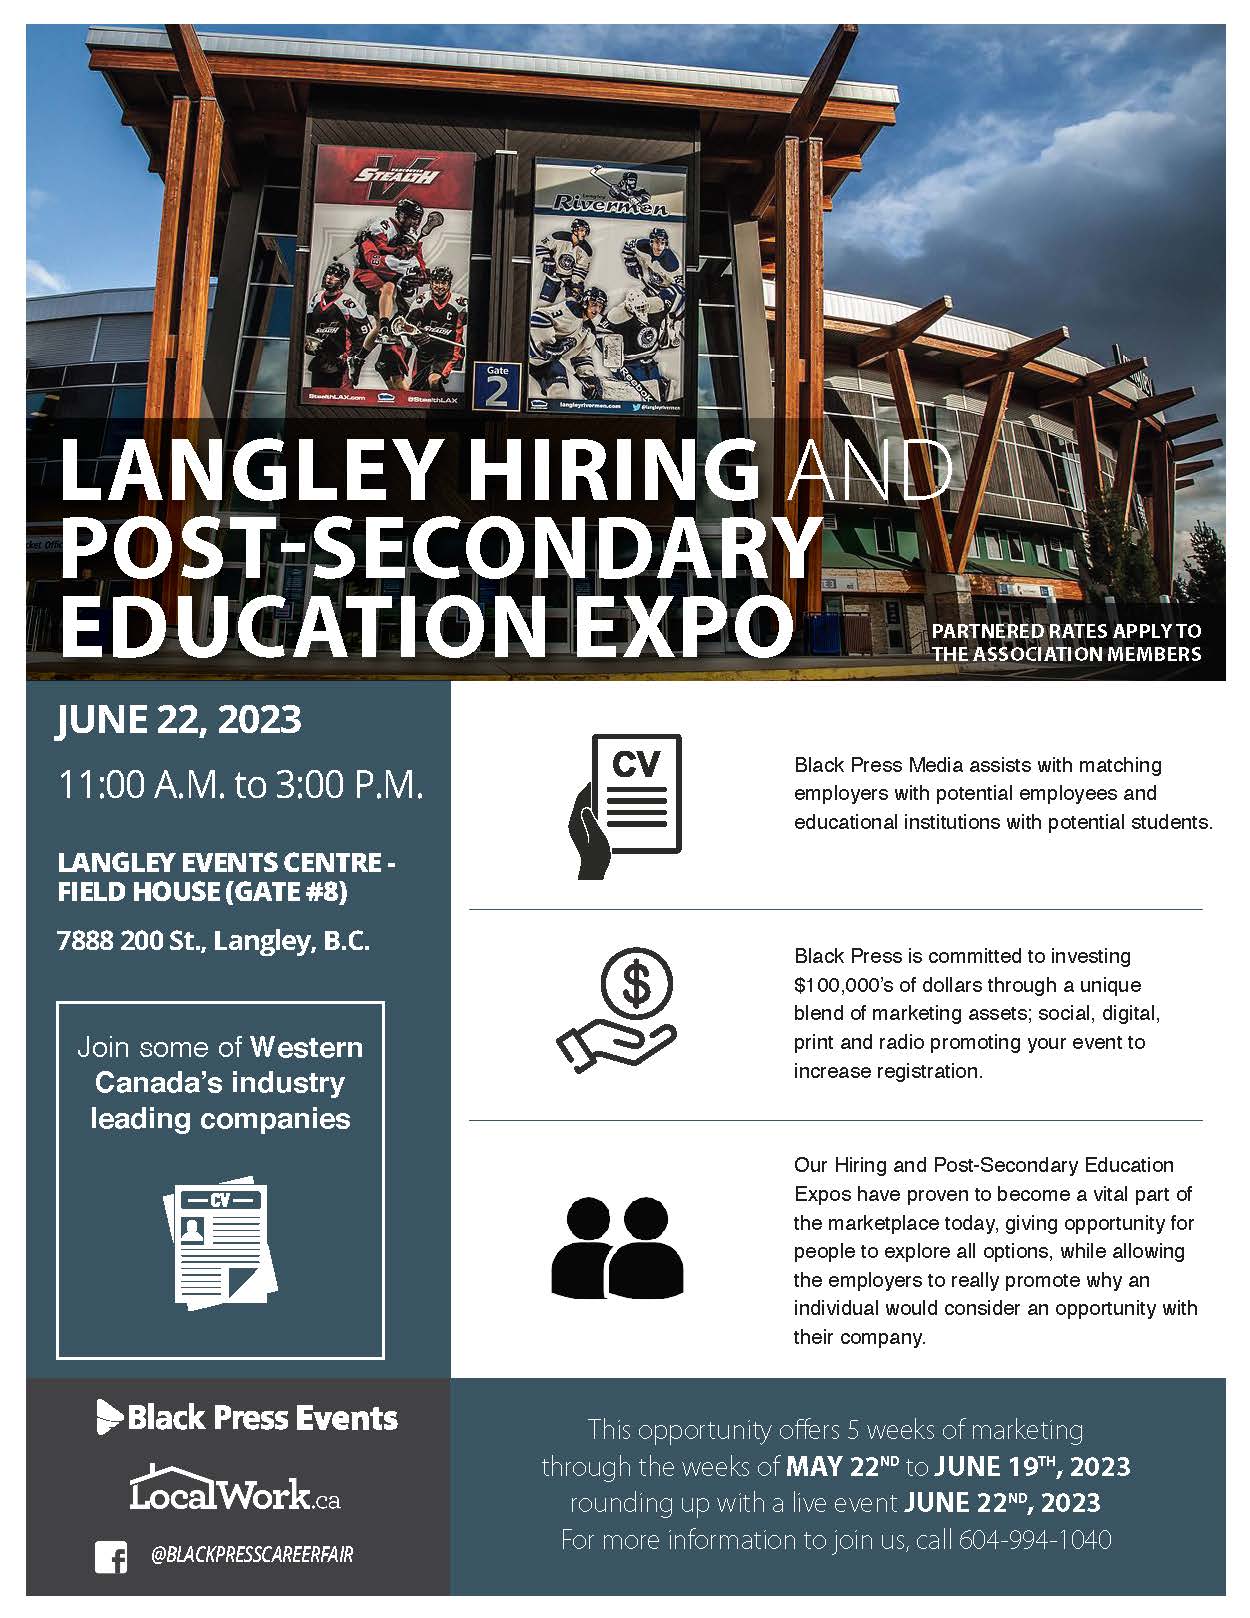 Image for Langley Hiring & Post-Secondary Expo with Black Press - June 22